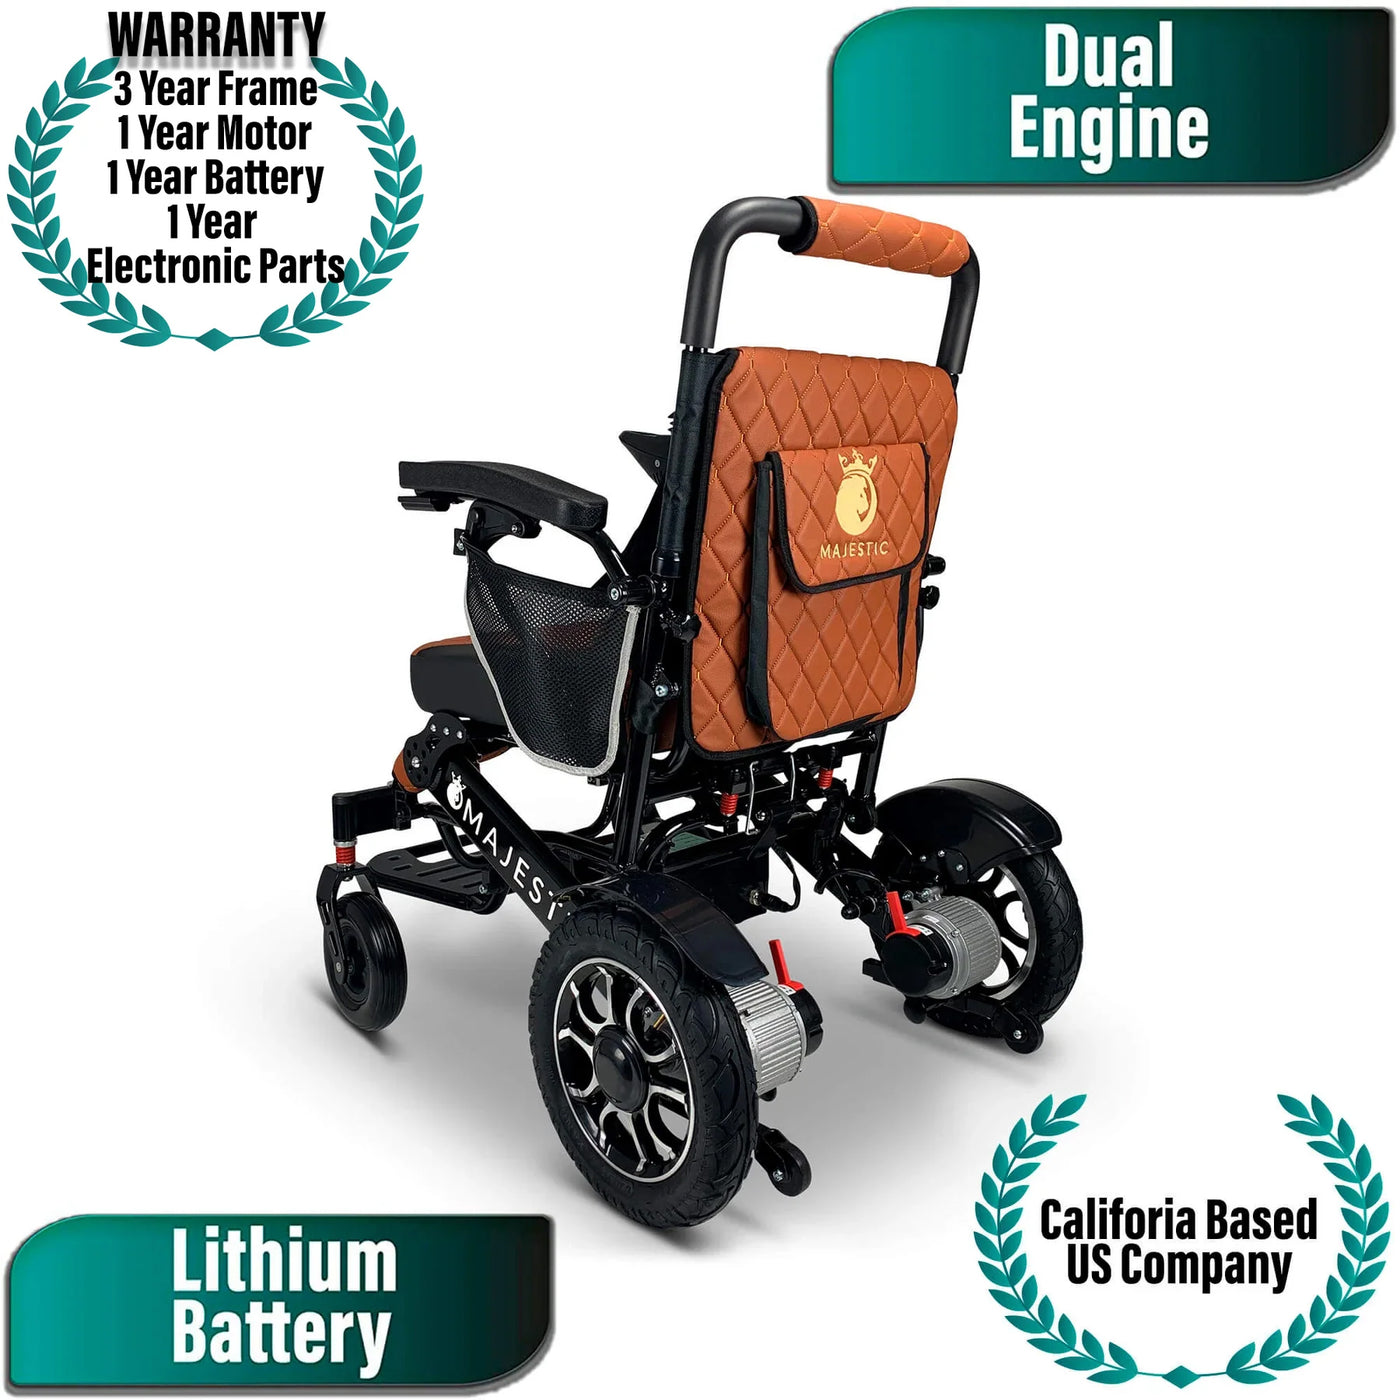 Automatic Folding Electric Wheelchair Airline Approved Remote Control 350 Lbs